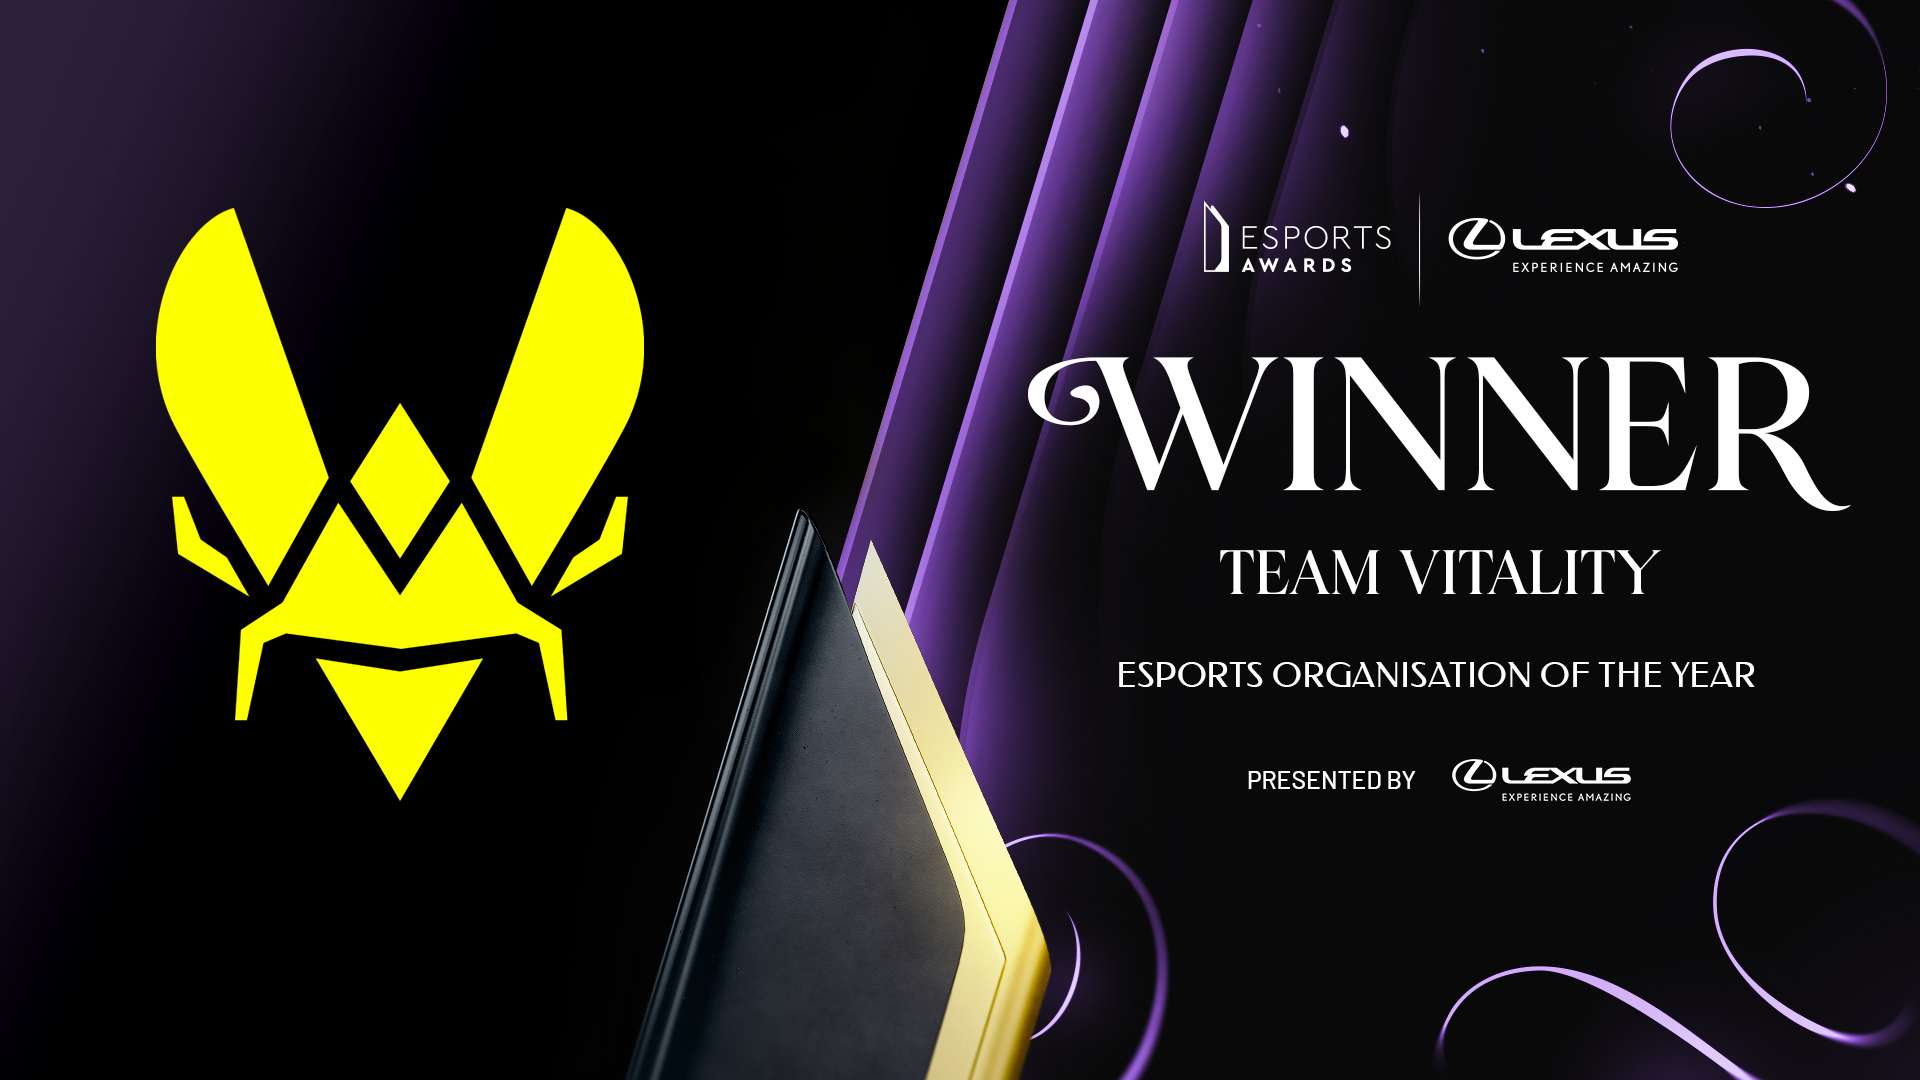 Esports Organisation of the Year thuộc về Team Vitality.